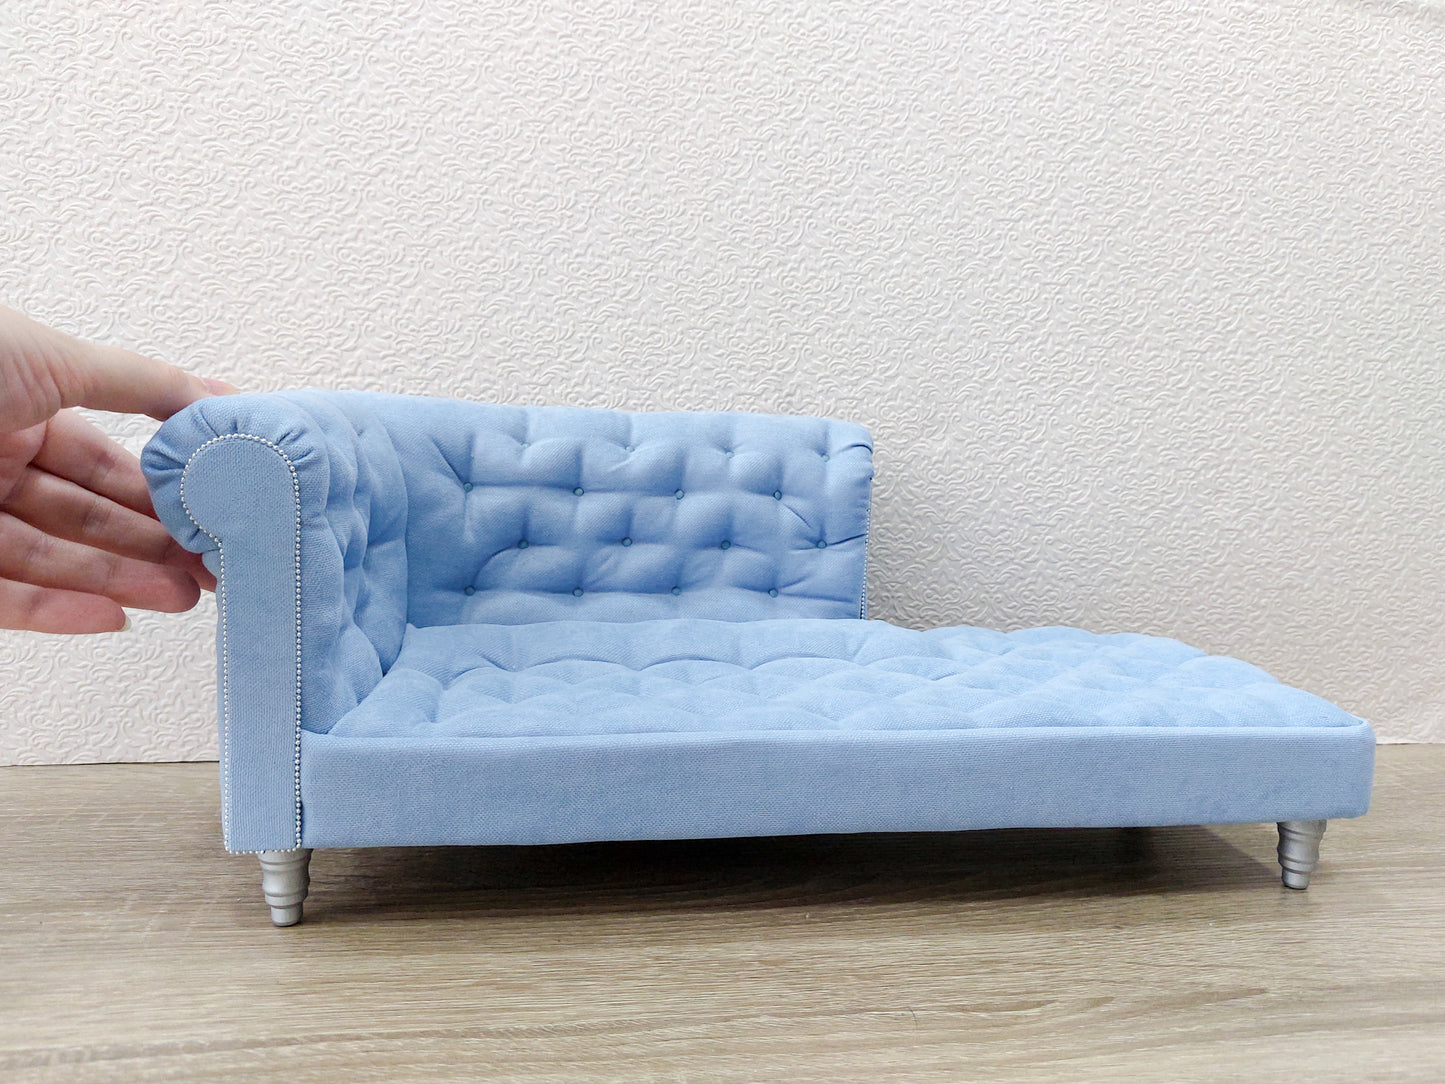 Chesterfield chaise lounge, blue